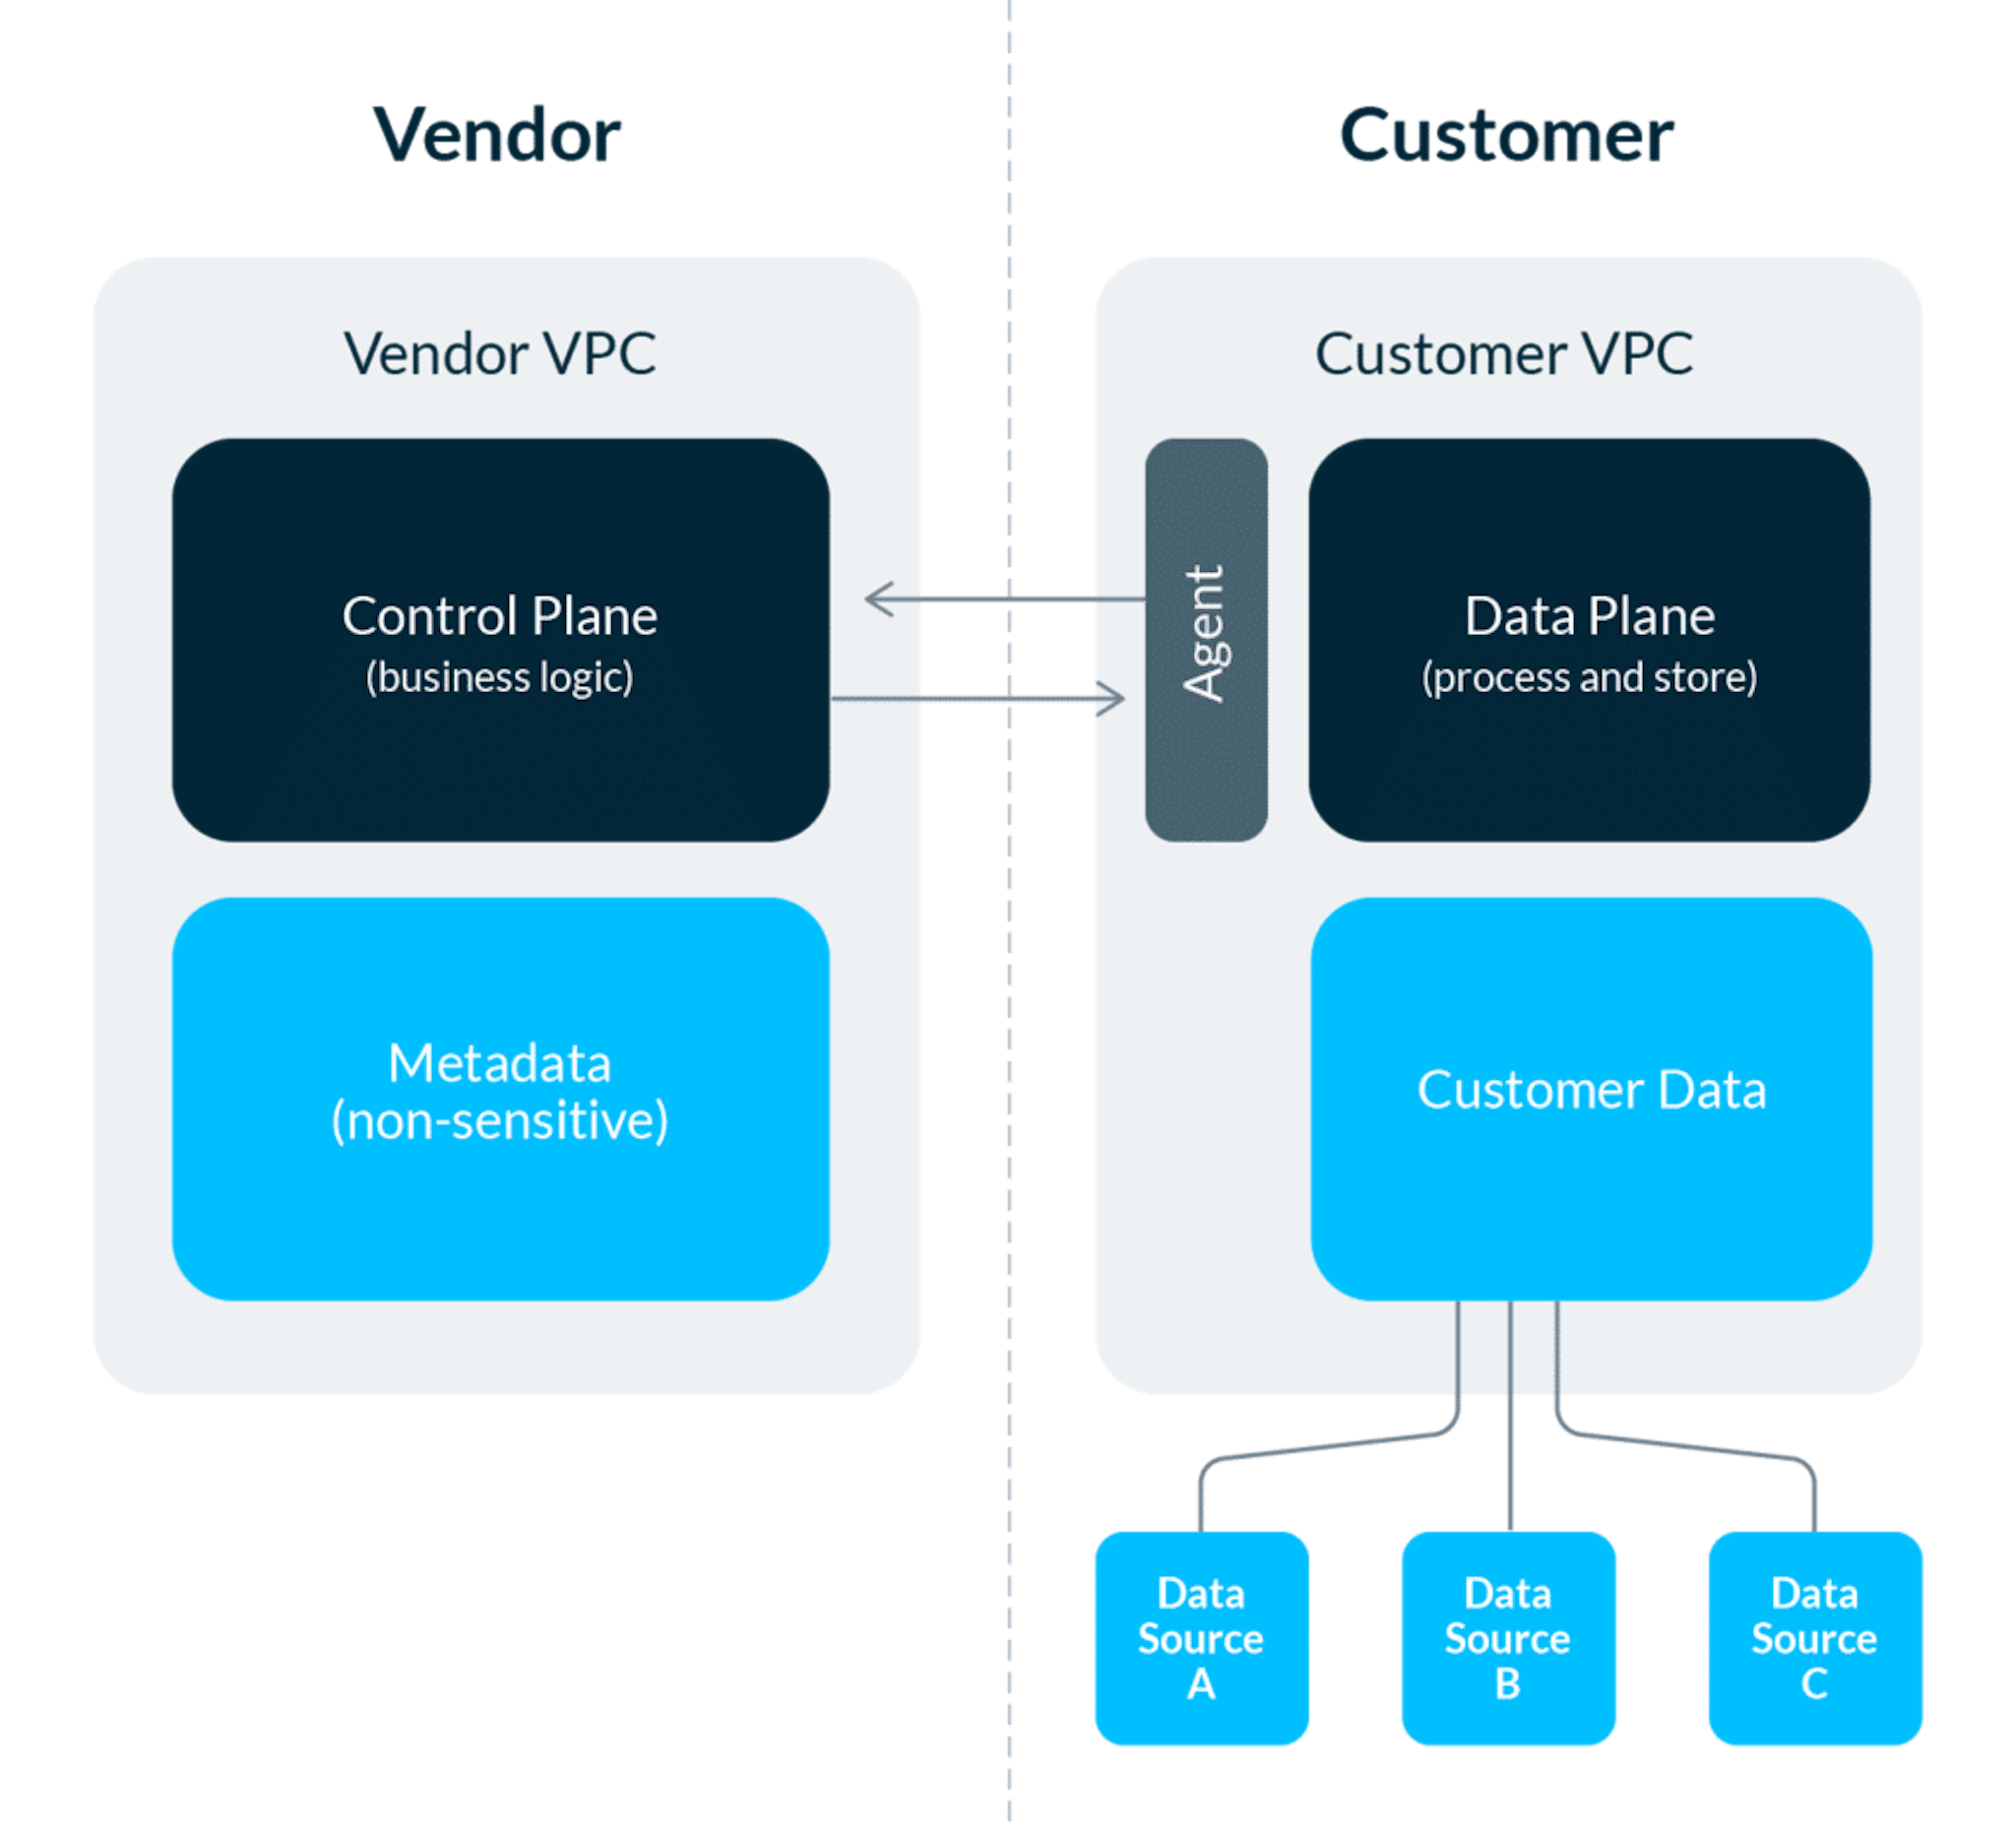 The hybrid architecture model leverages best practice from software engineering and DevOps architectures to combine the security of on-prem with the ease of a SaaS deployment. Image courtesy of authors.